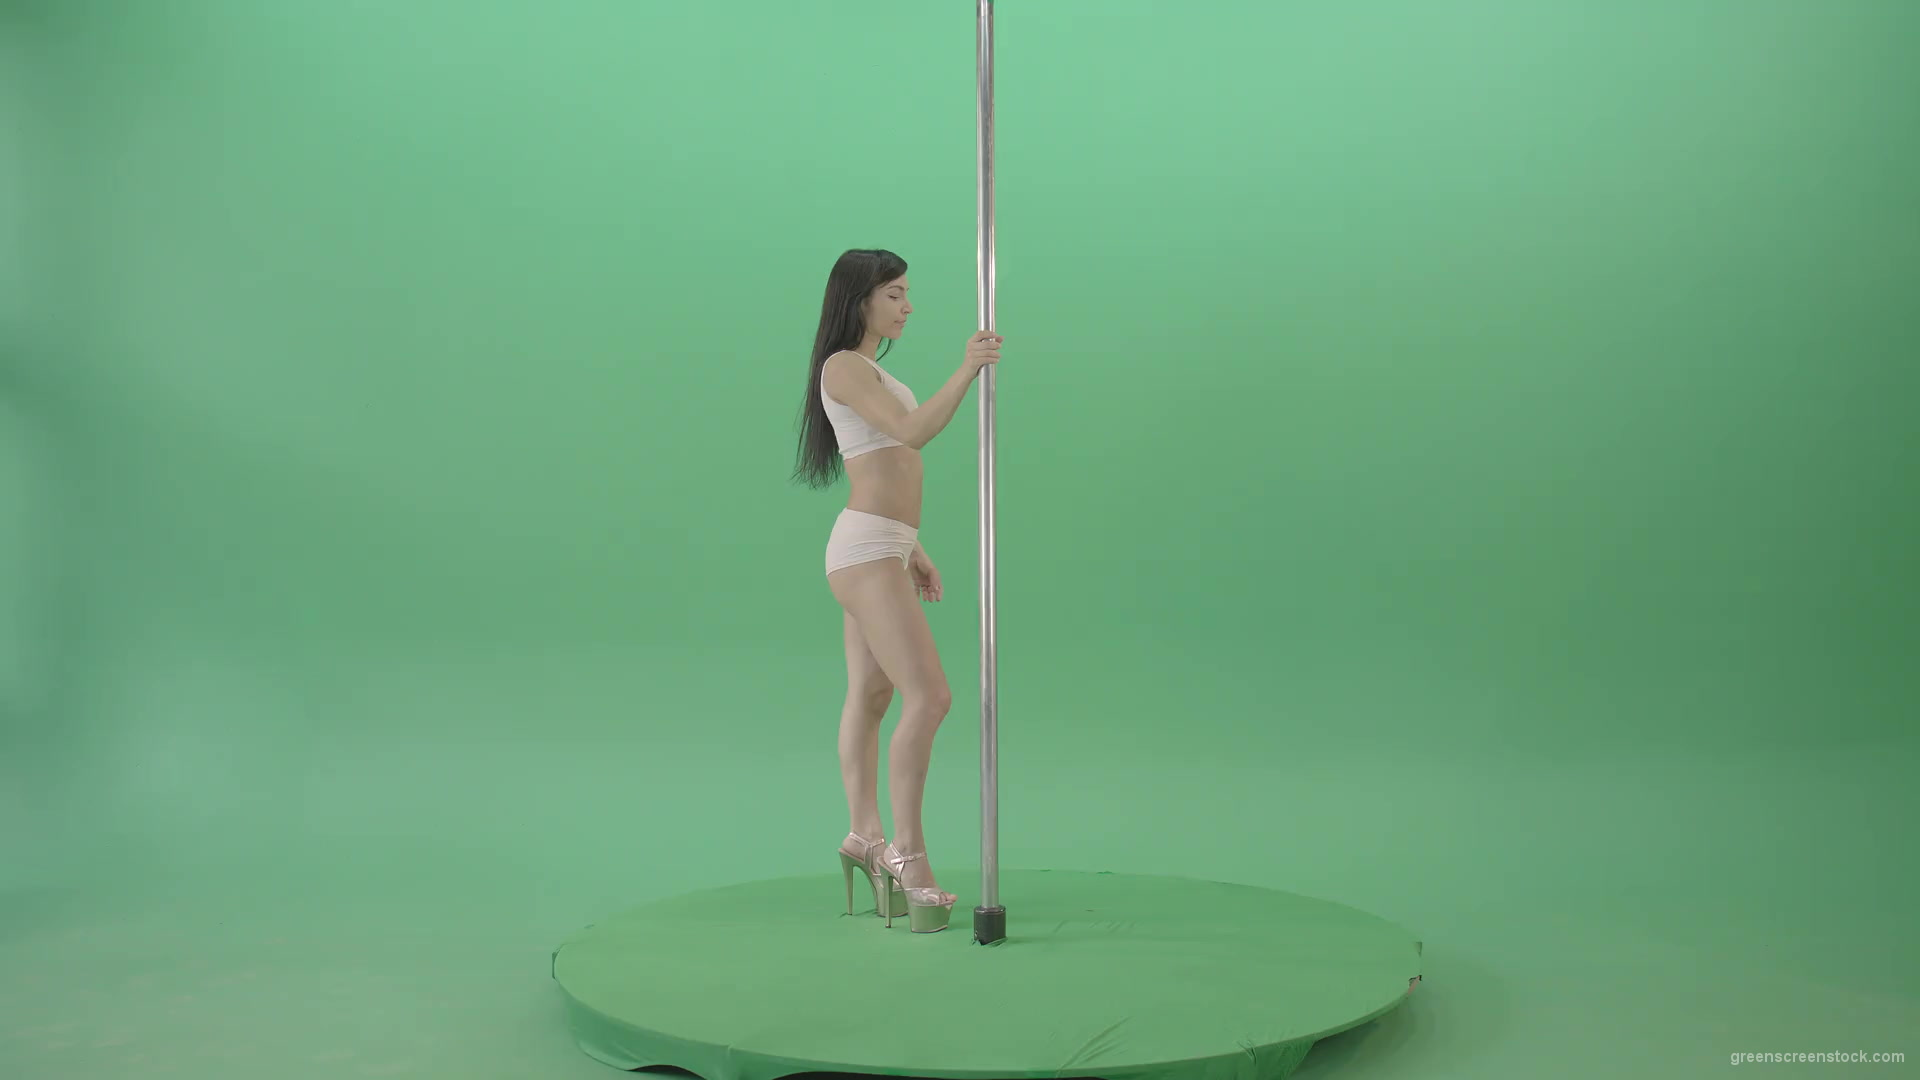 White-dressed-Girl-spinning-down-head-on-pole-dance-on-green-screen-4K-Video-Footage-1920_001 Green Screen Stock